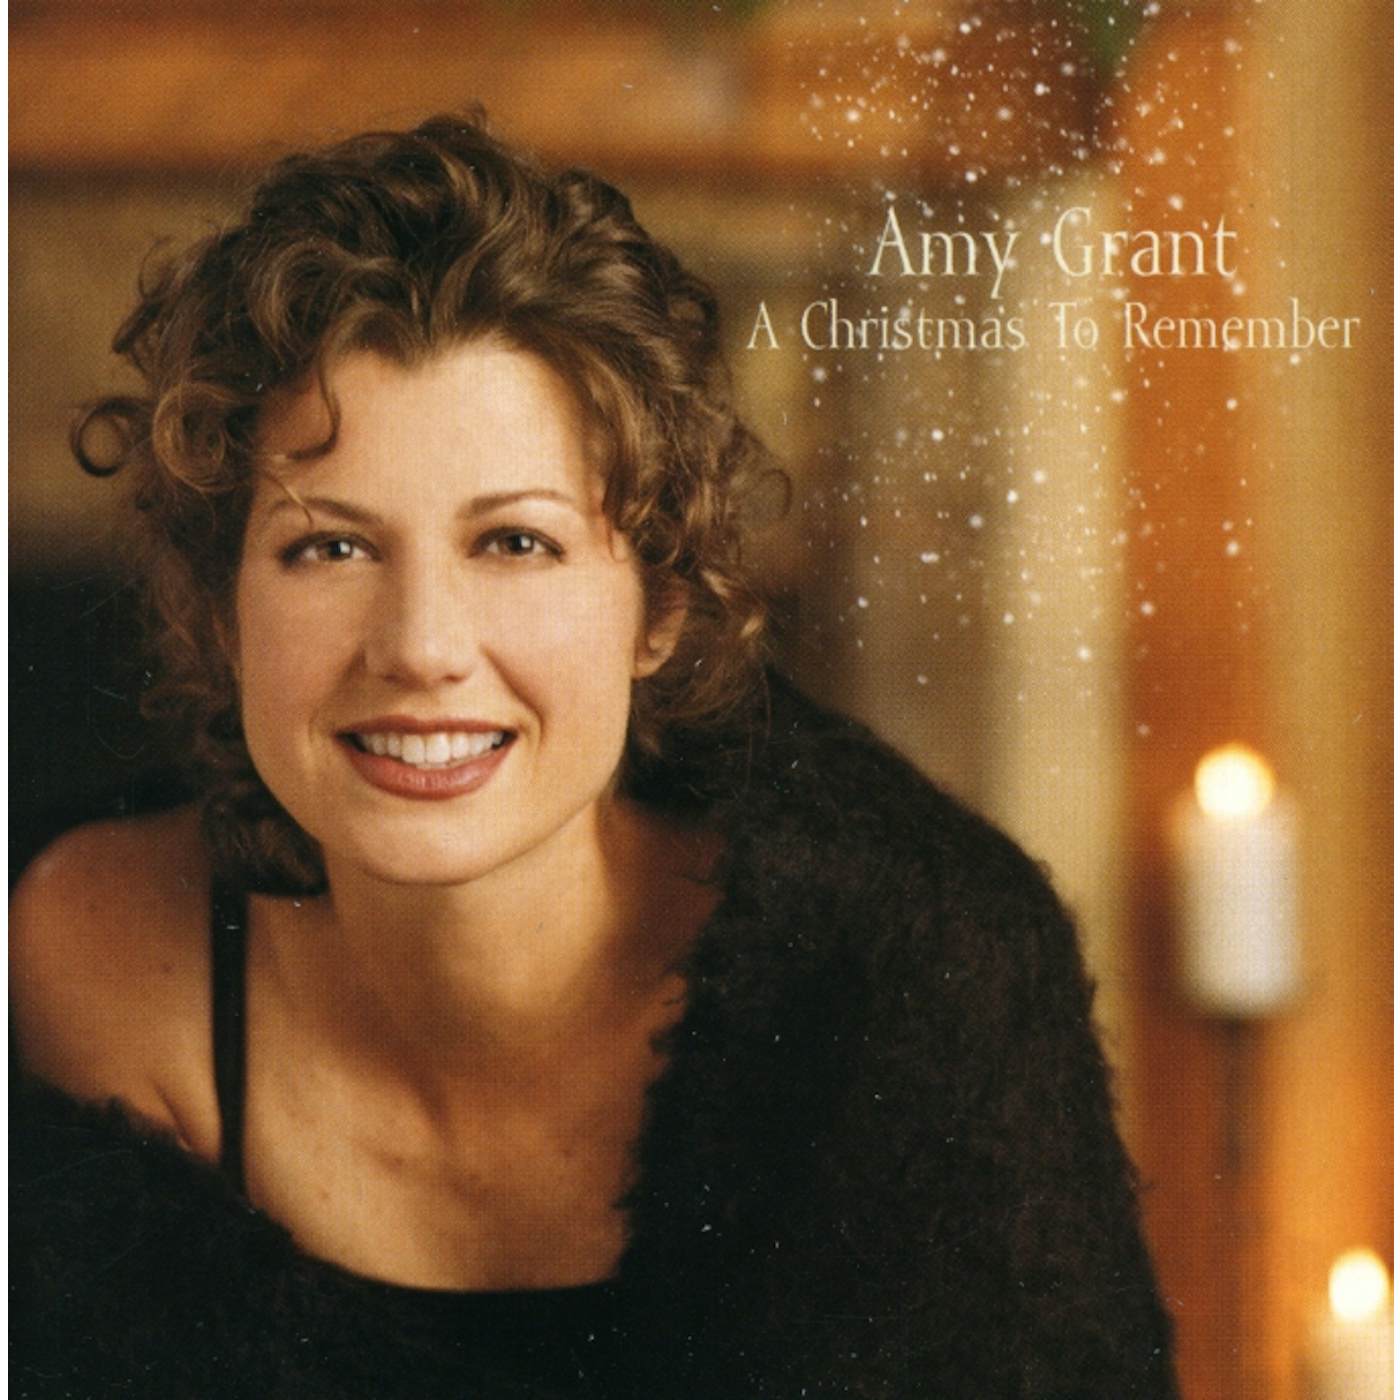 Amy Grant CHRISTMAS TO REMEMBER CD